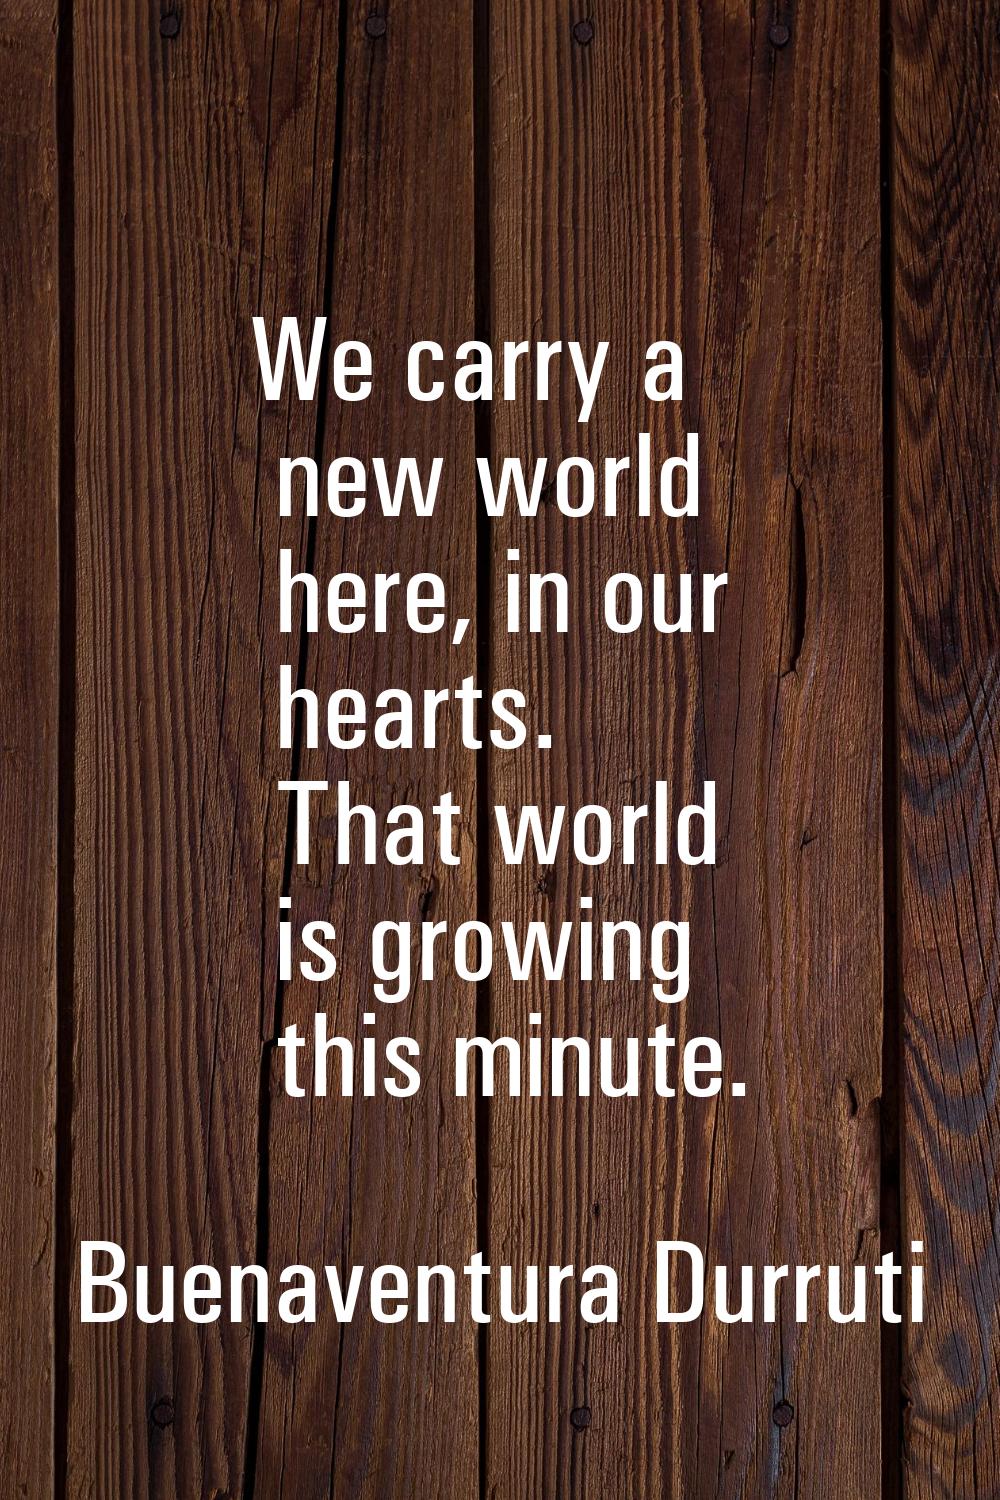 We carry a new world here, in our hearts. That world is growing this minute.